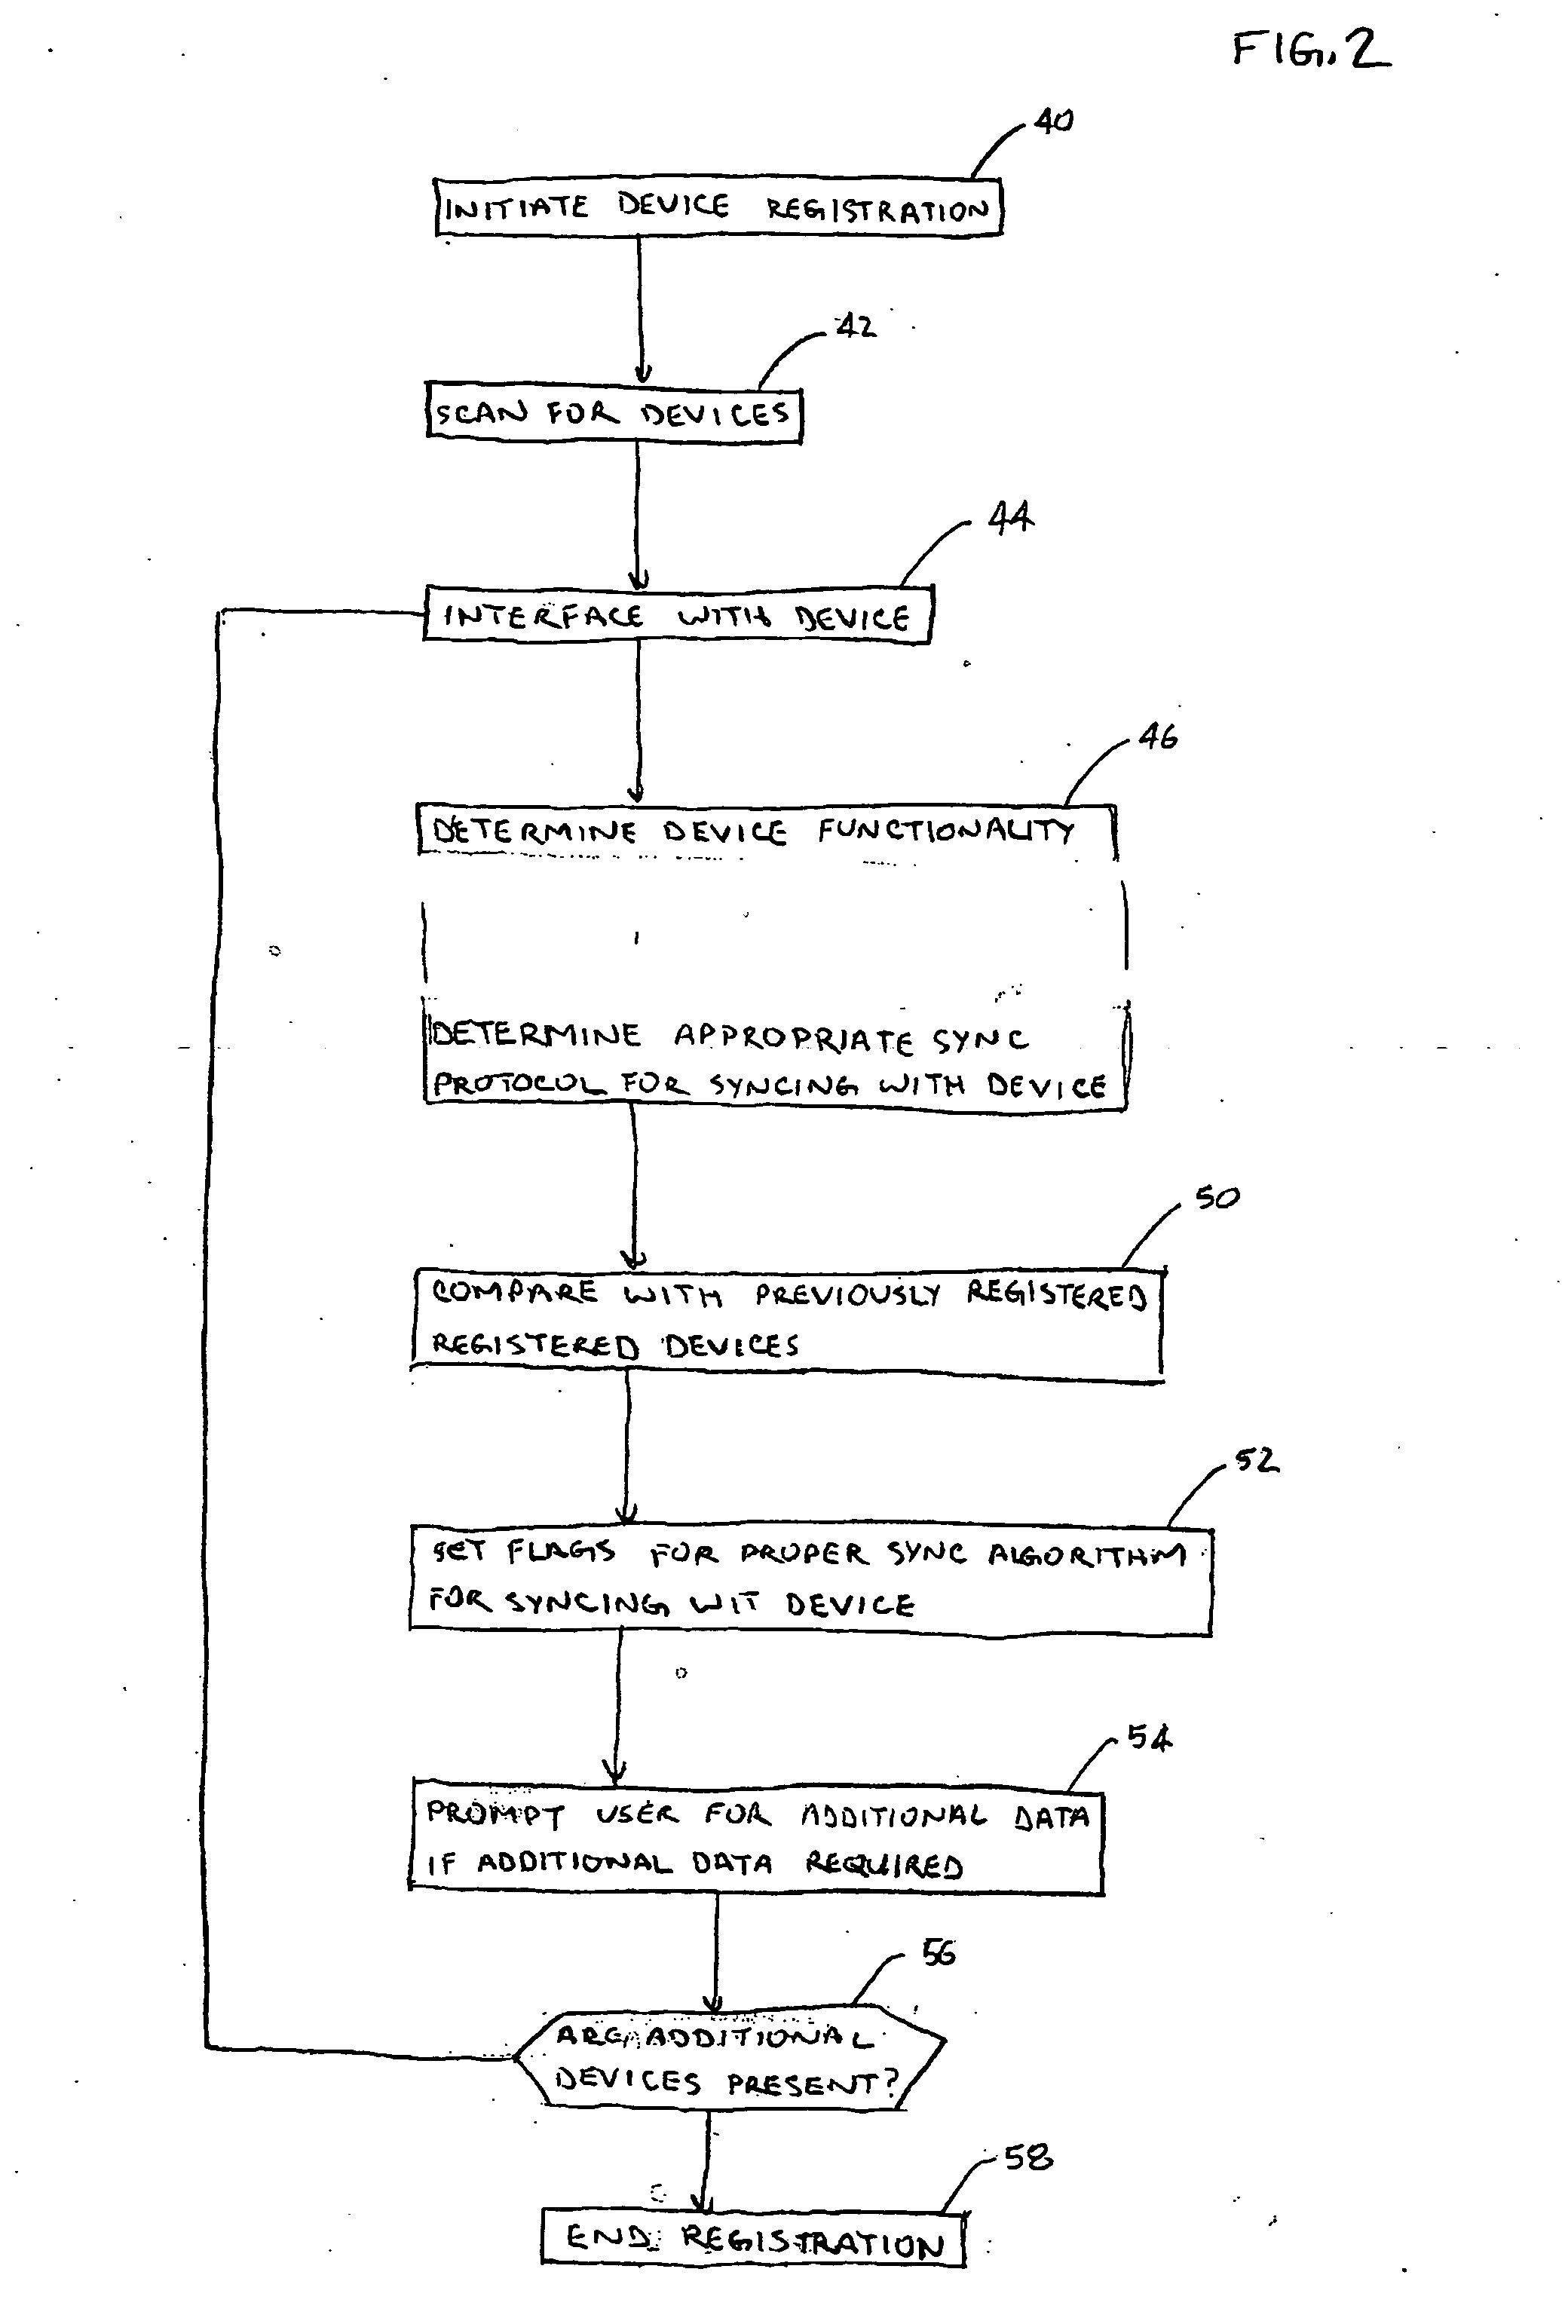 System and method for synchronizing personal data among a plurality of devices storing such data